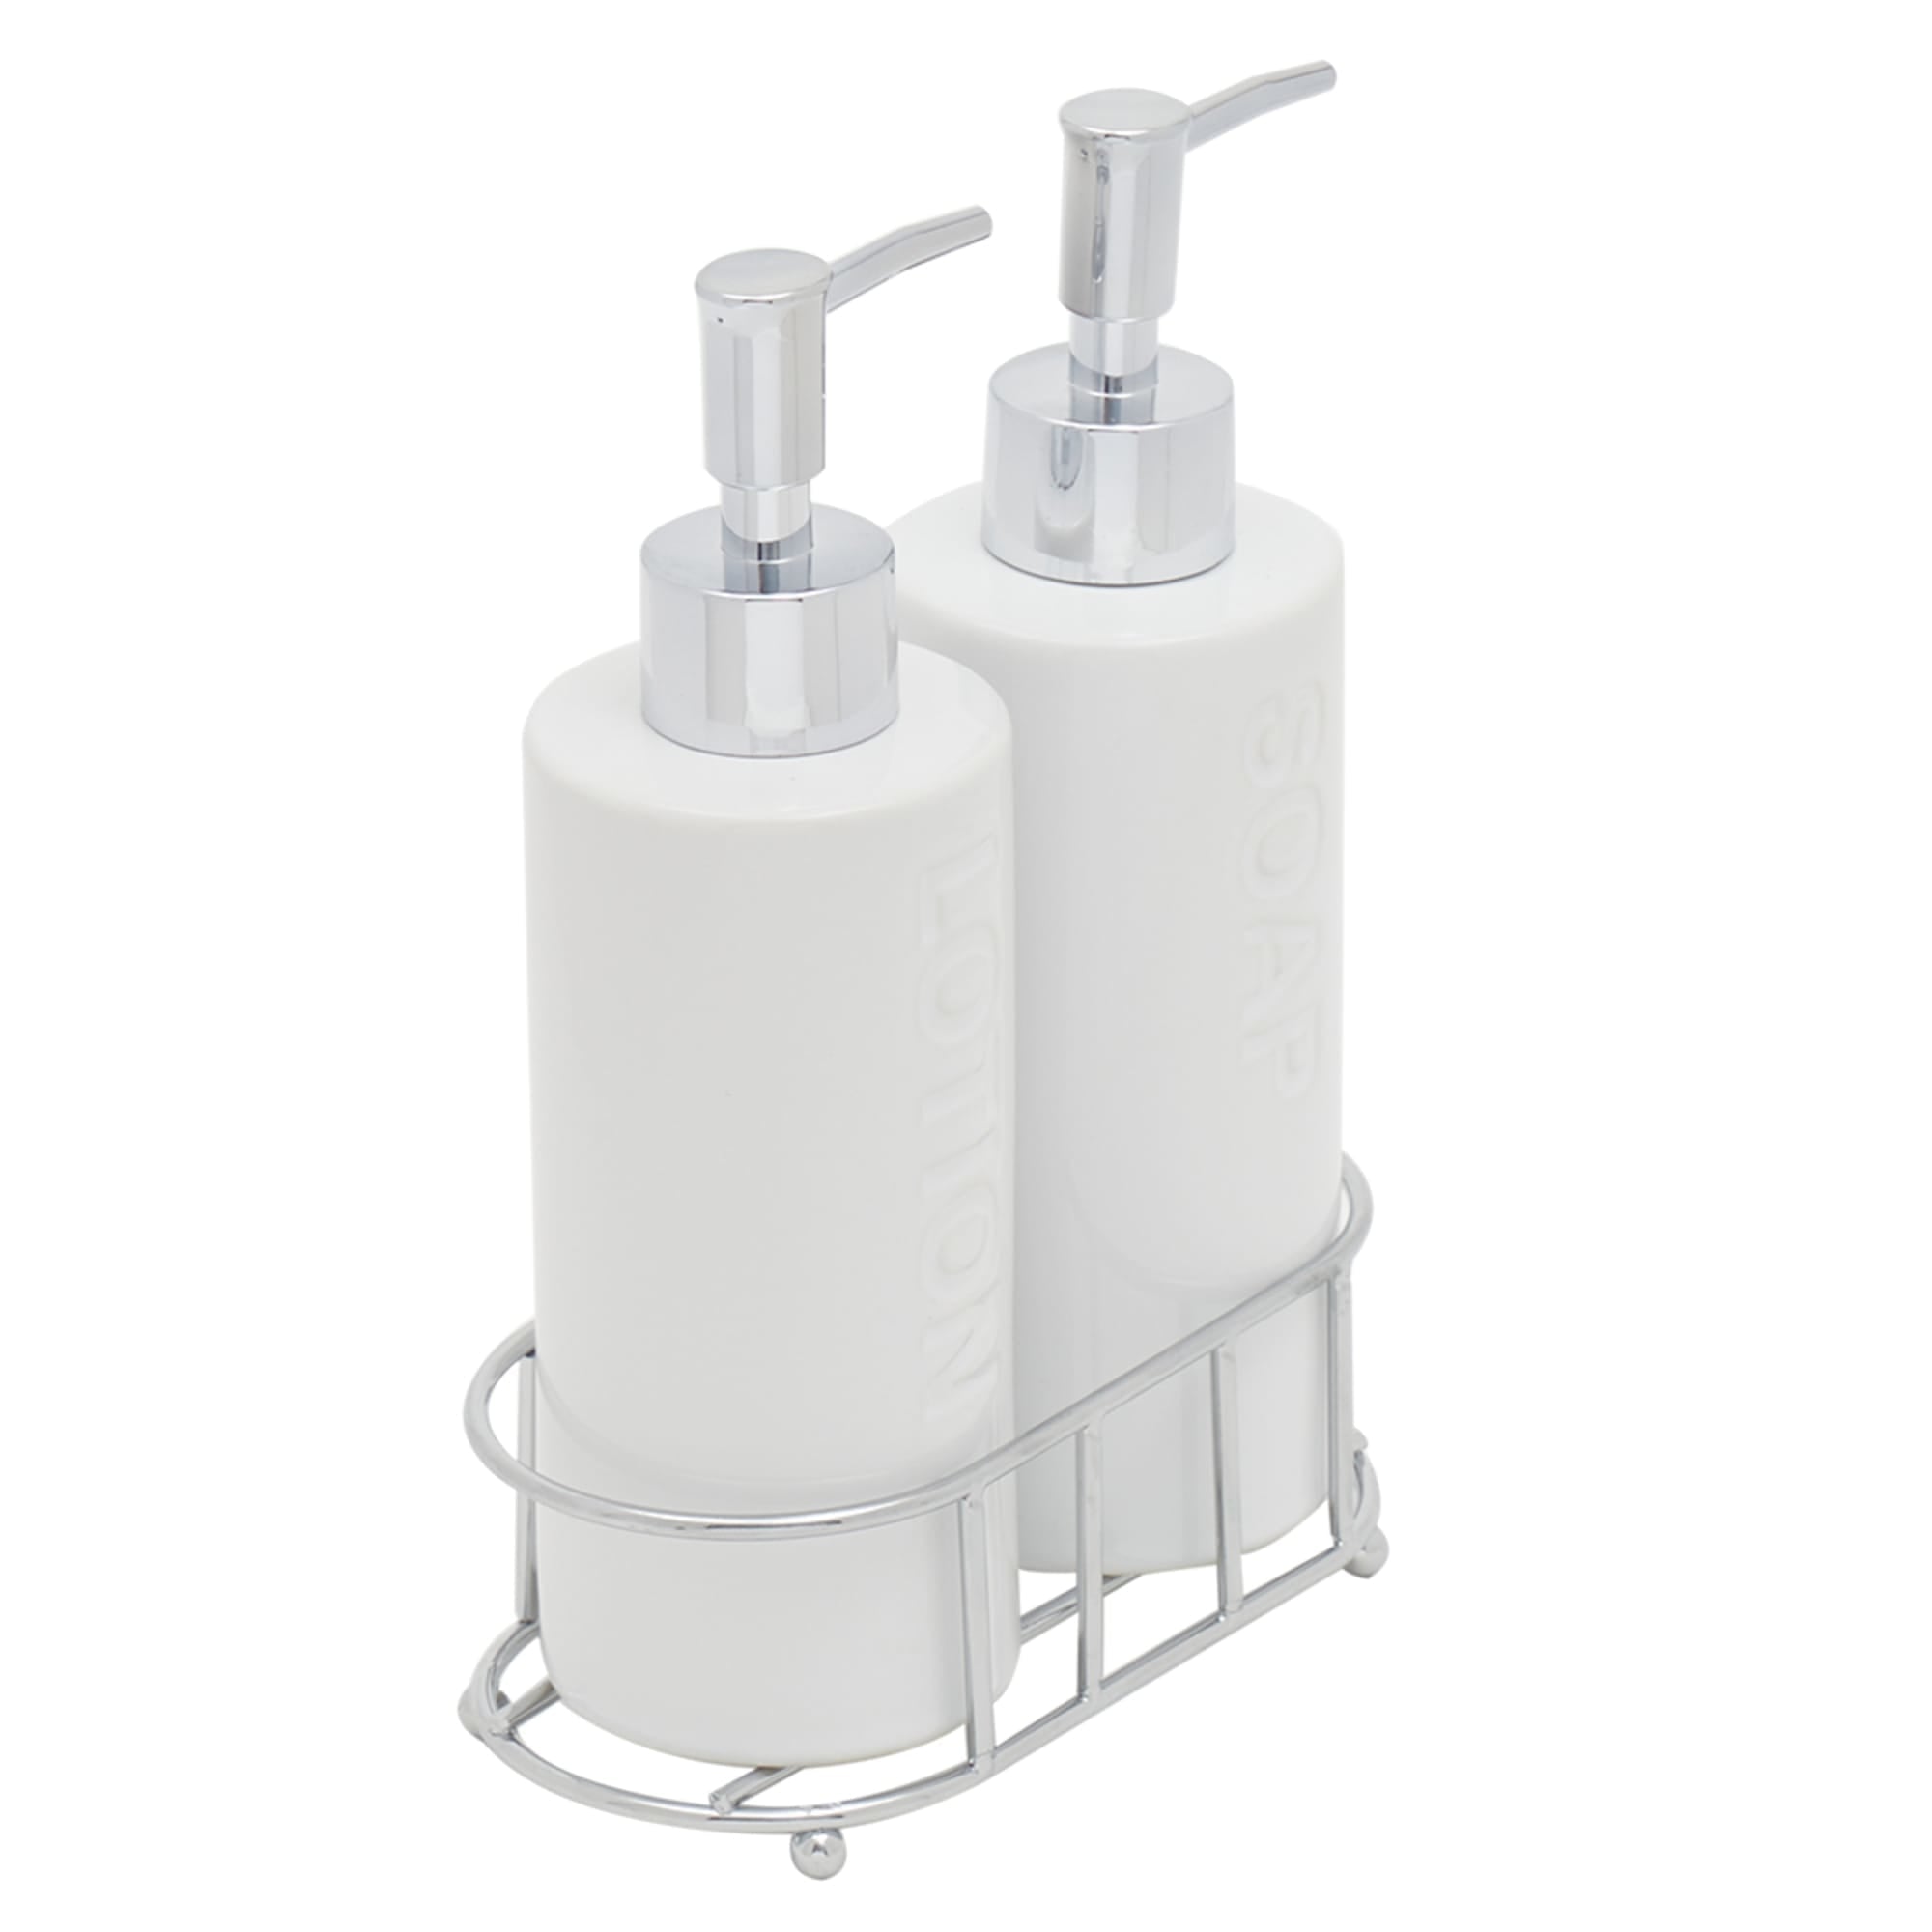 Home Basics 2-Piece Ceramic Dispensers With Caddy, White $10.00 EACH, CASE PACK OF 6